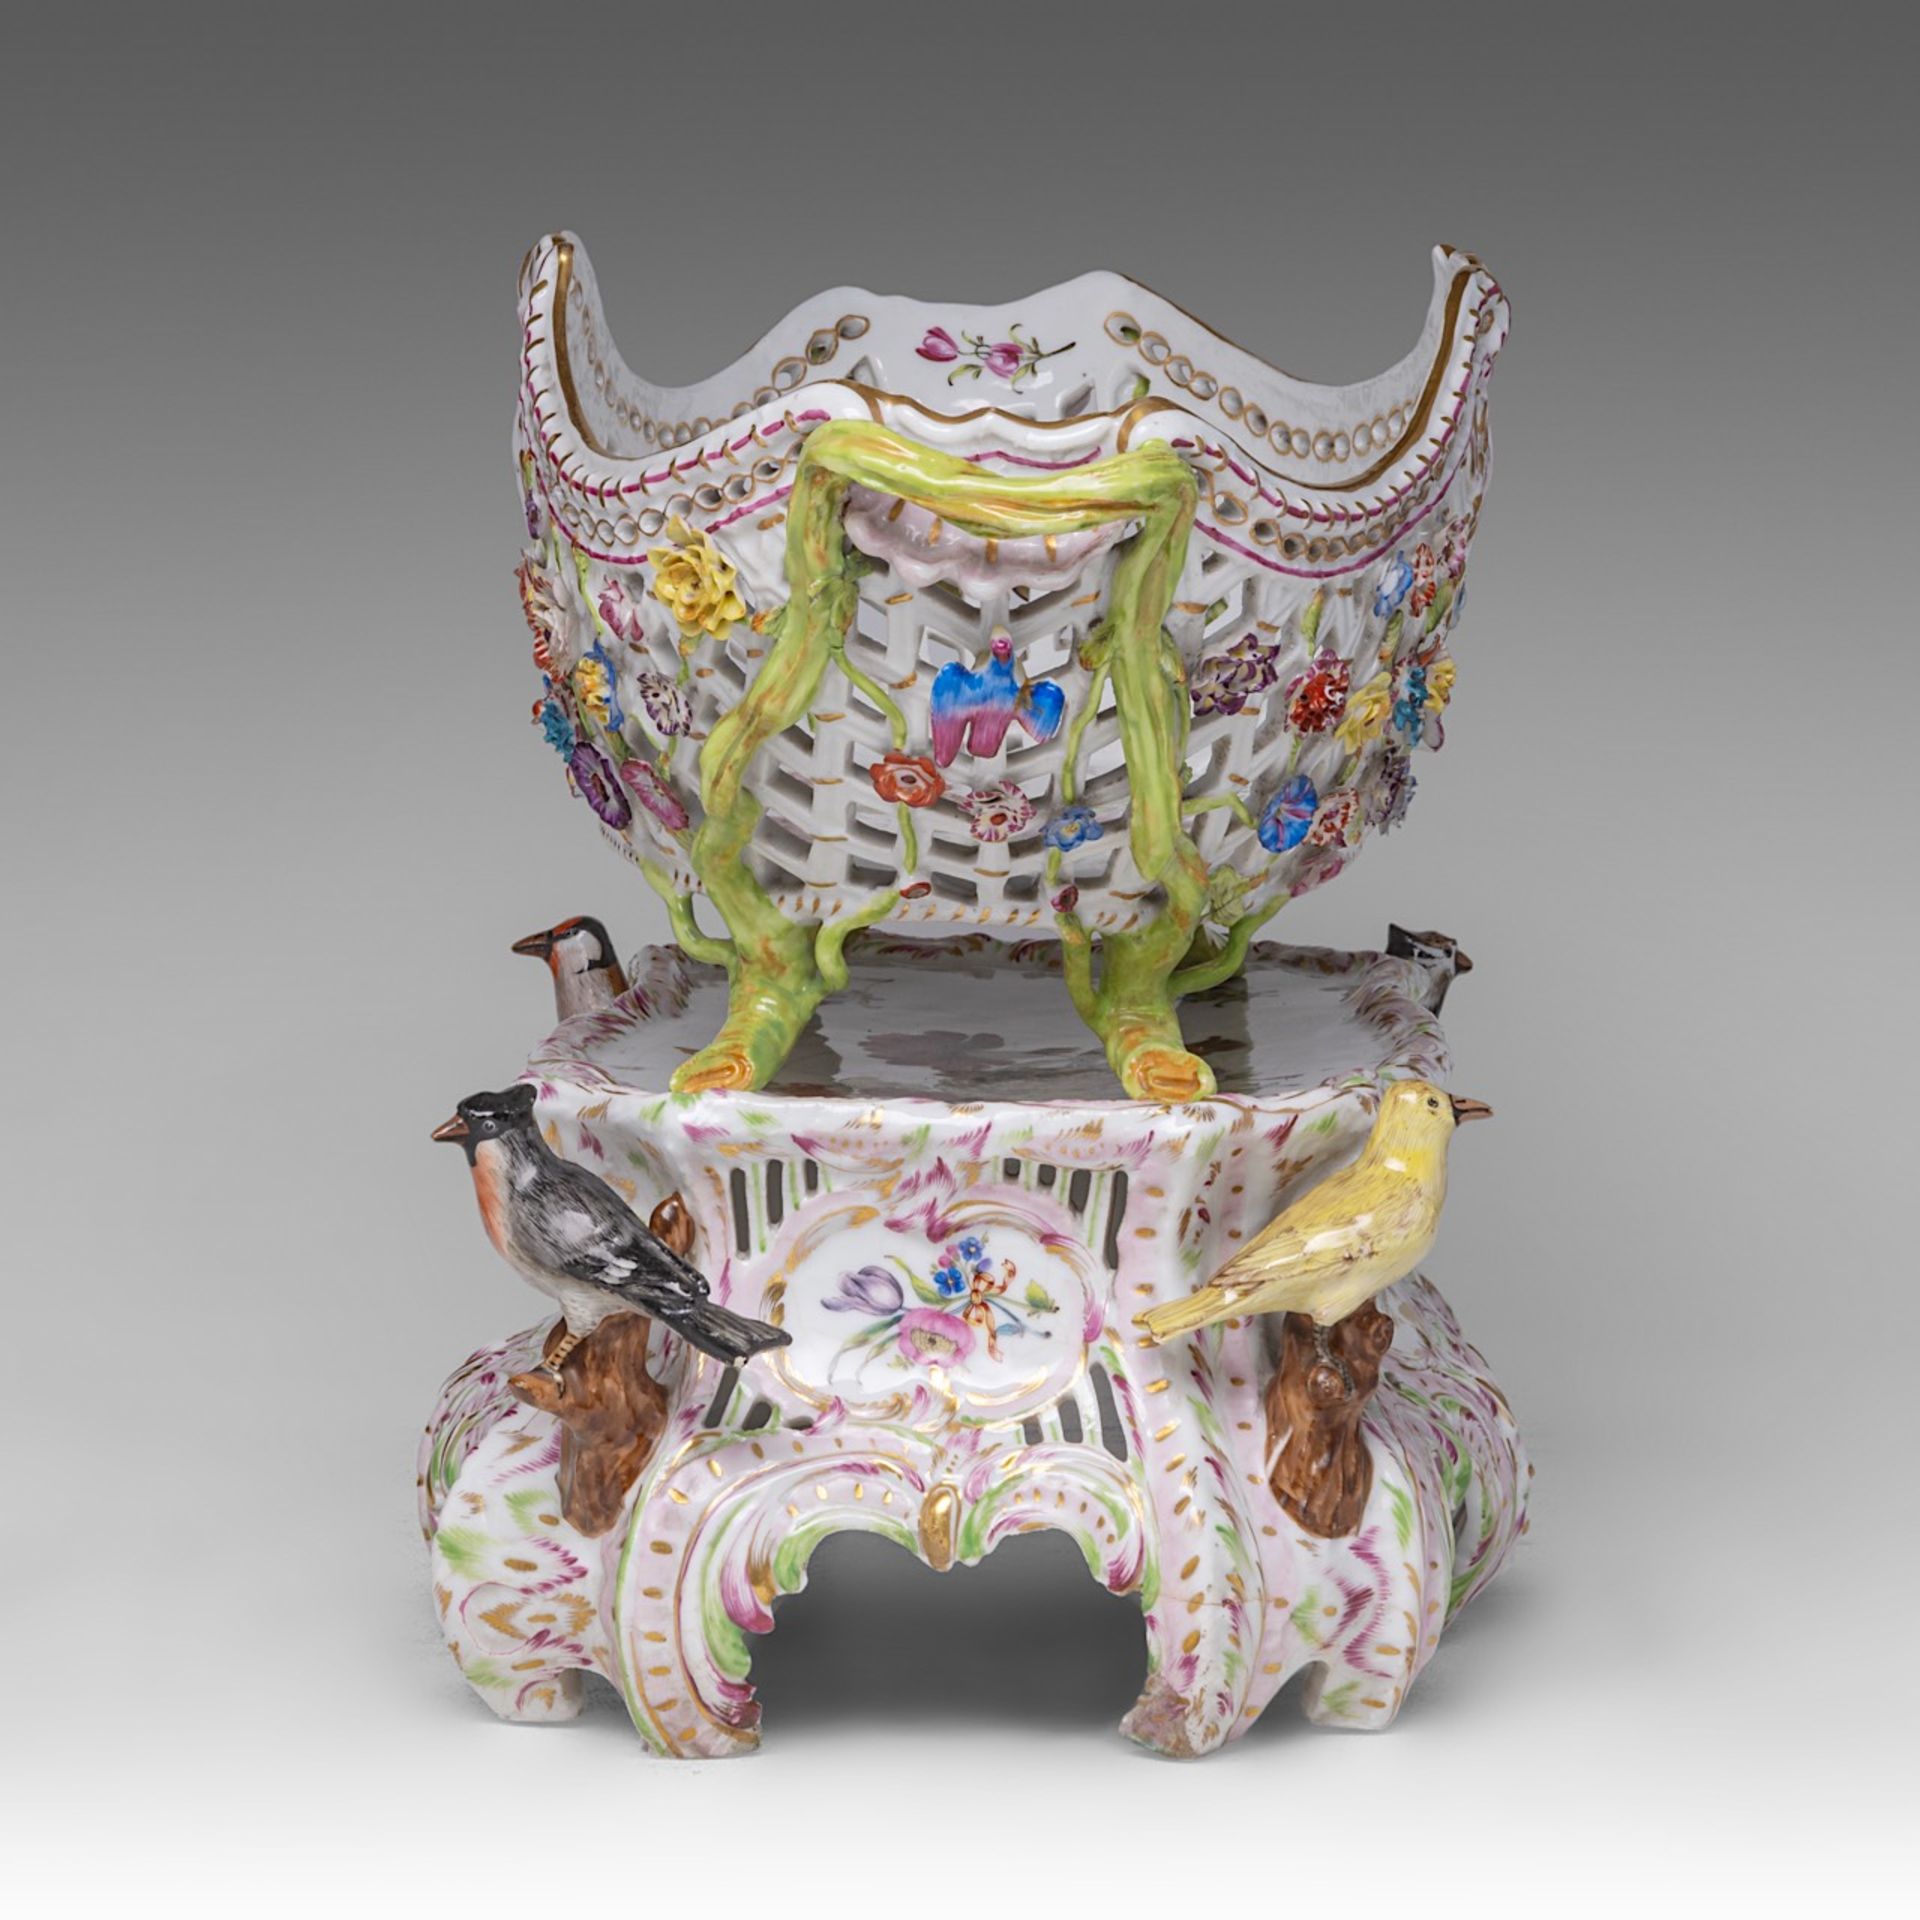 A polychrome Saxony porcelain basket on stand, decorated with modelled birds and flowers, H 33 - W 4 - Bild 3 aus 12